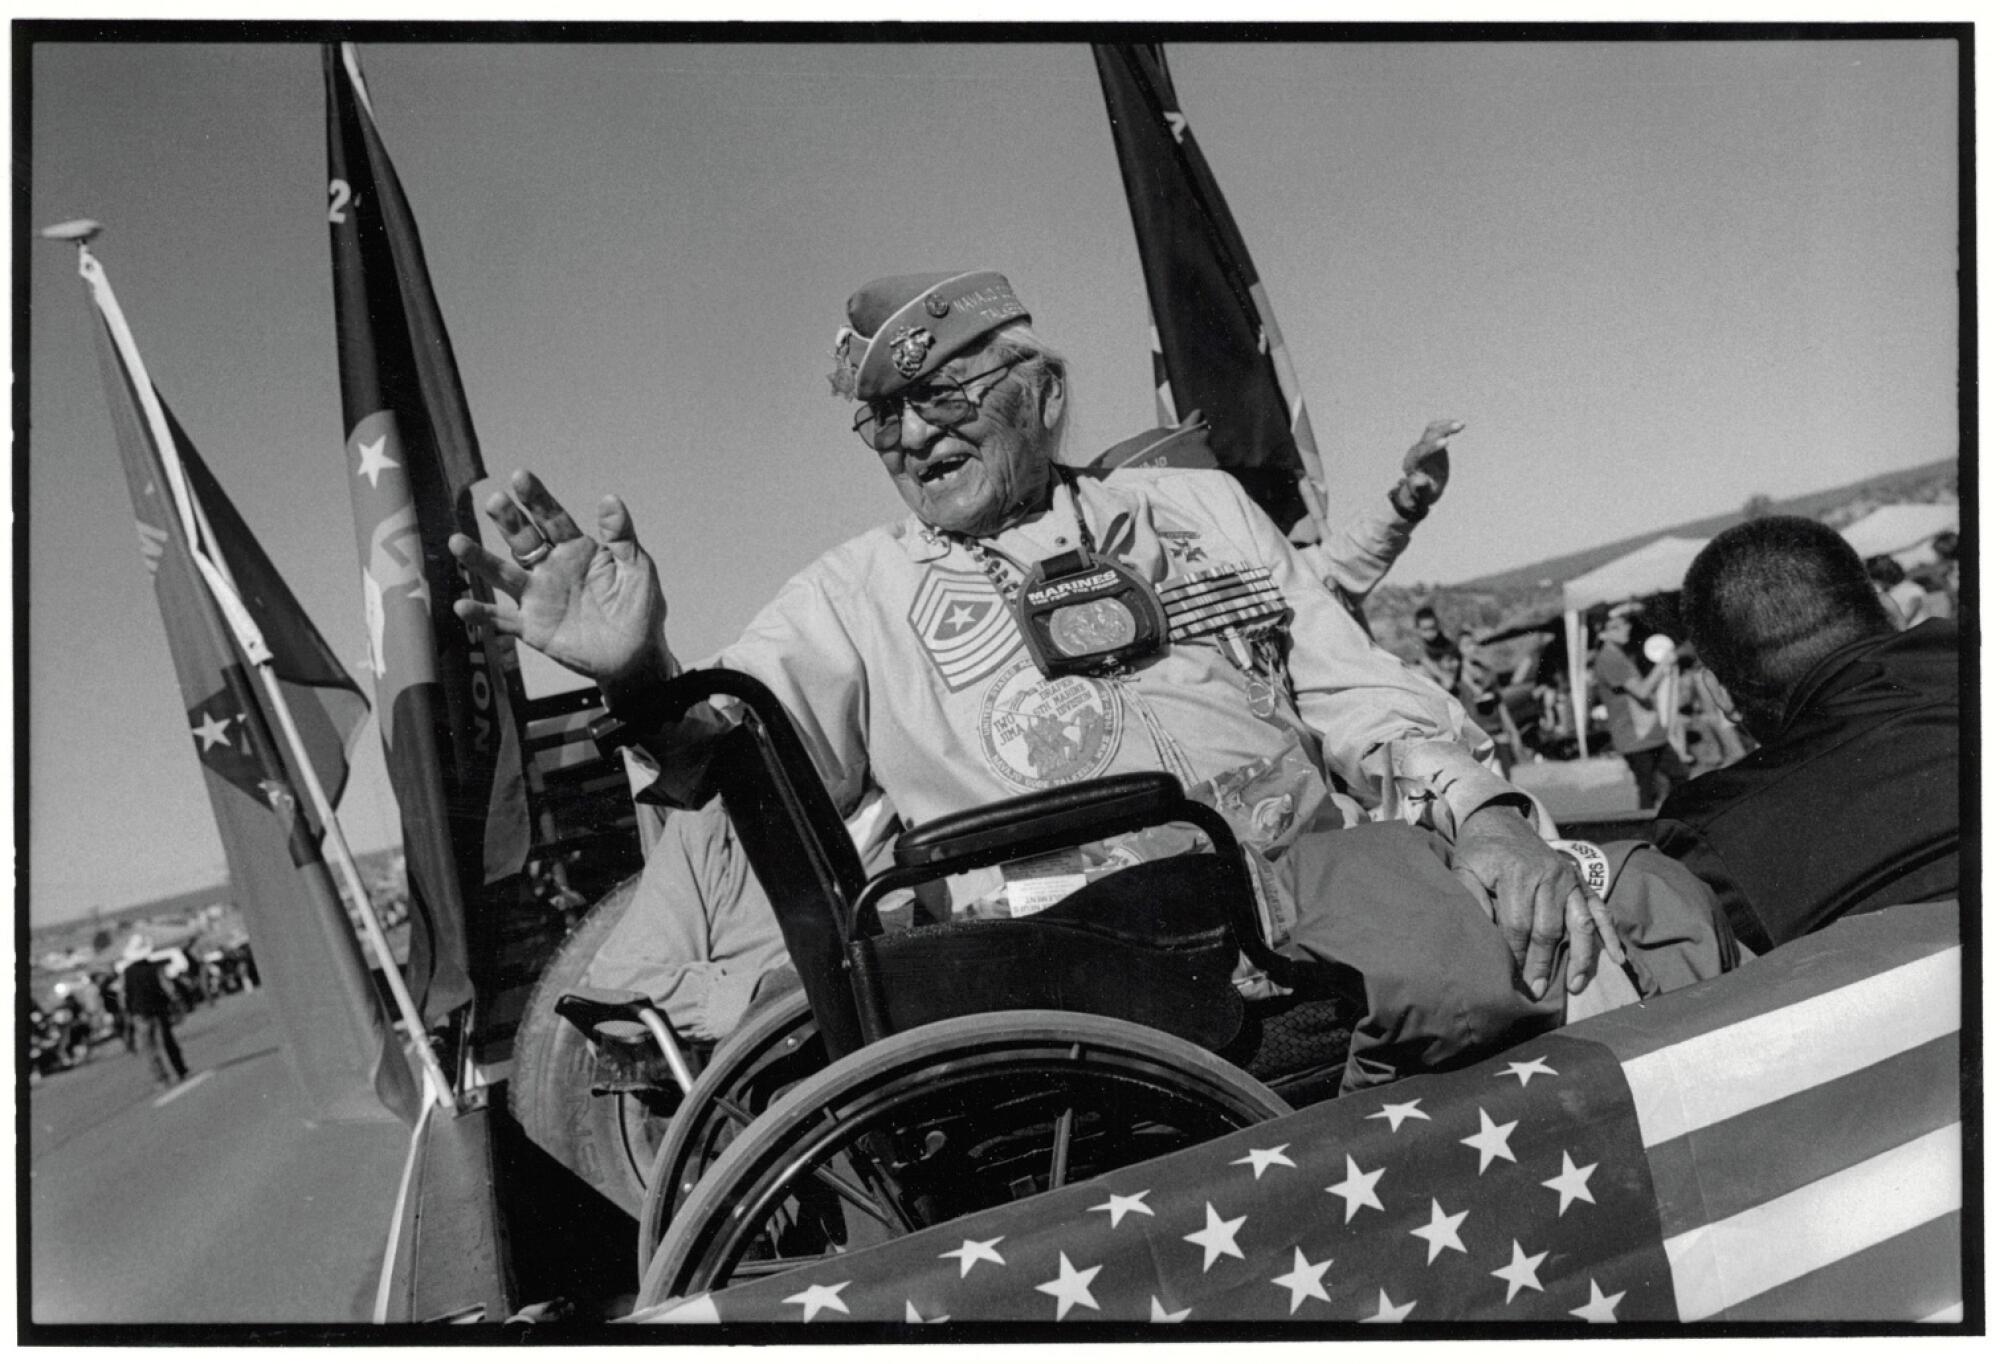 A man waves during a parade.